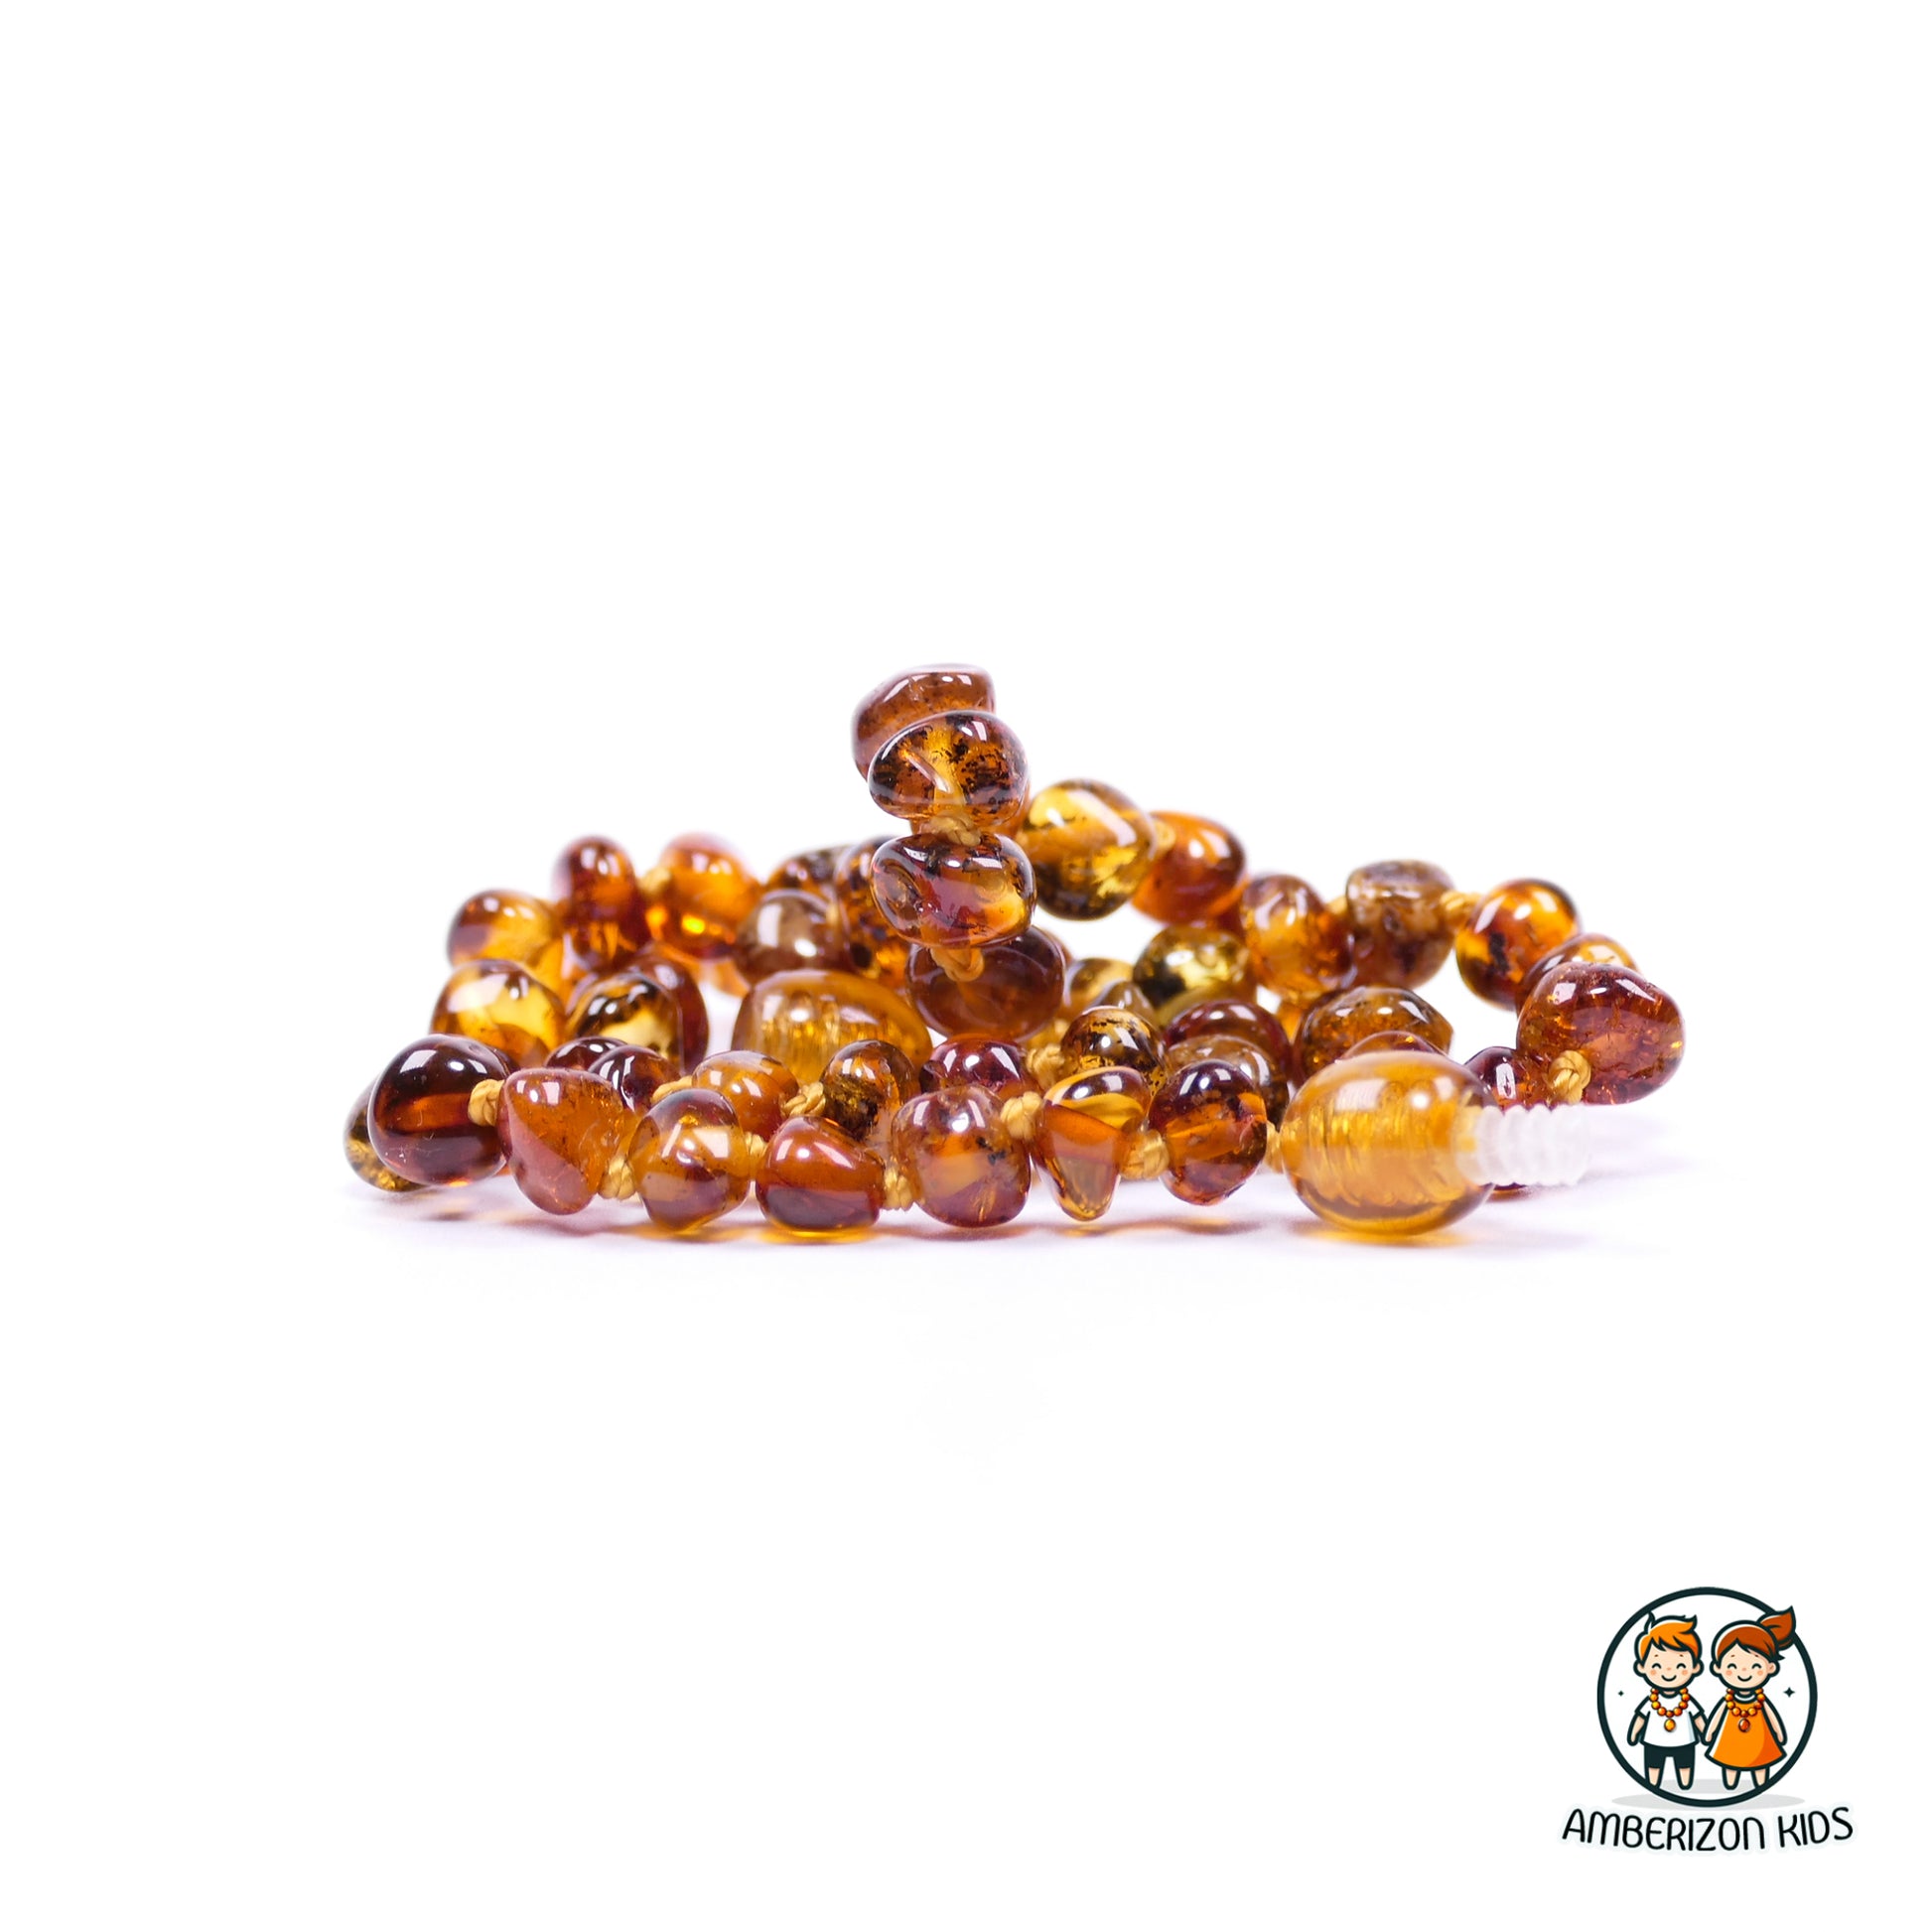 Kids' Amber Teething Necklace - All-Natural - Comforting Cognac, Honey, and Green Gemstone Beads